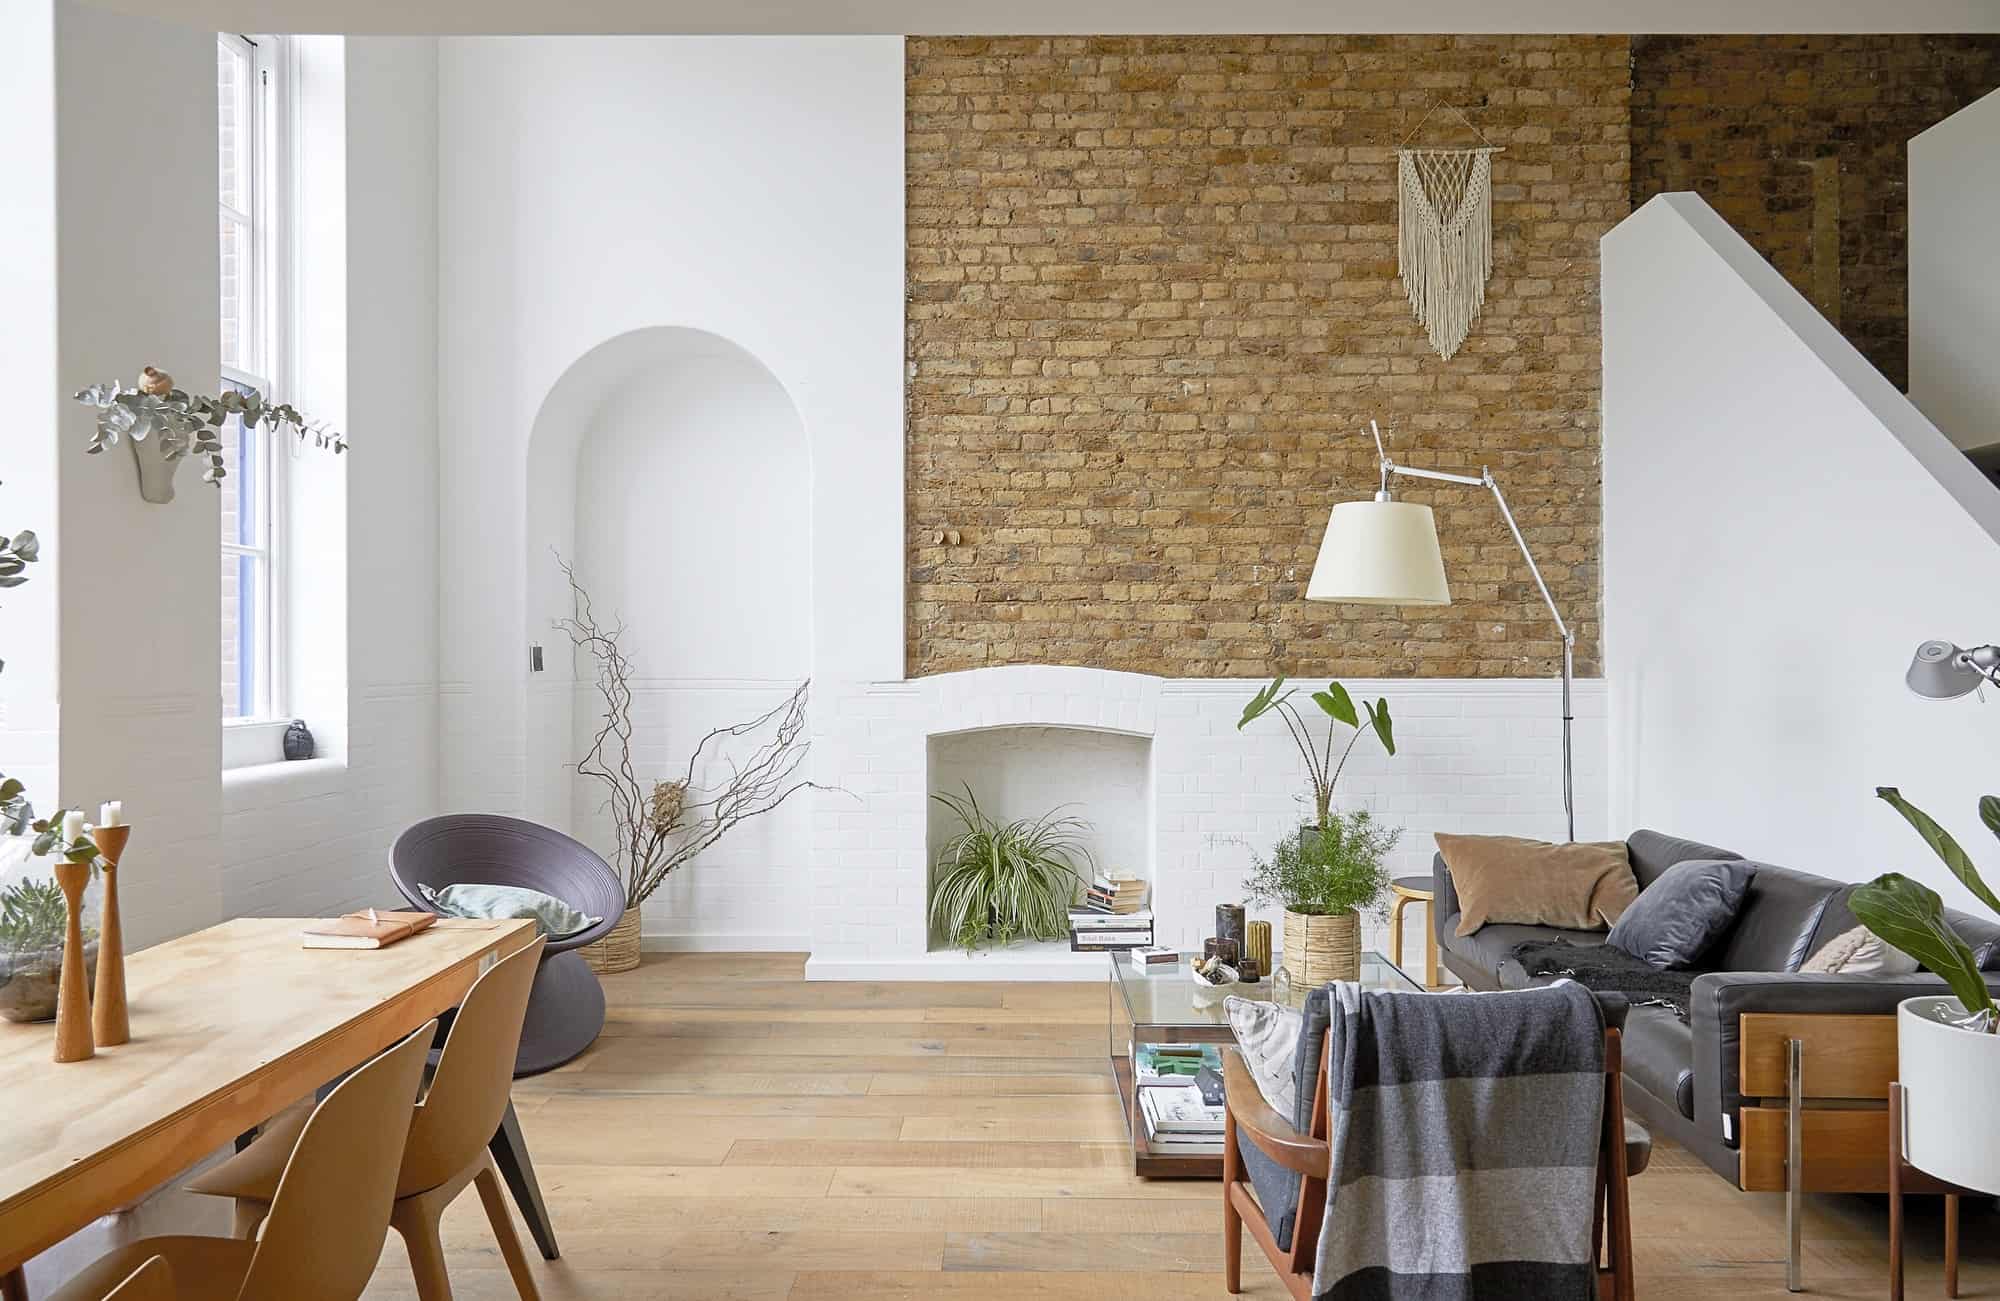 School House E9 - A light filled duplex apartment with mid-century and Scandi inspired interiors available for fashion and lifestyle photo shoots - The Location Guys